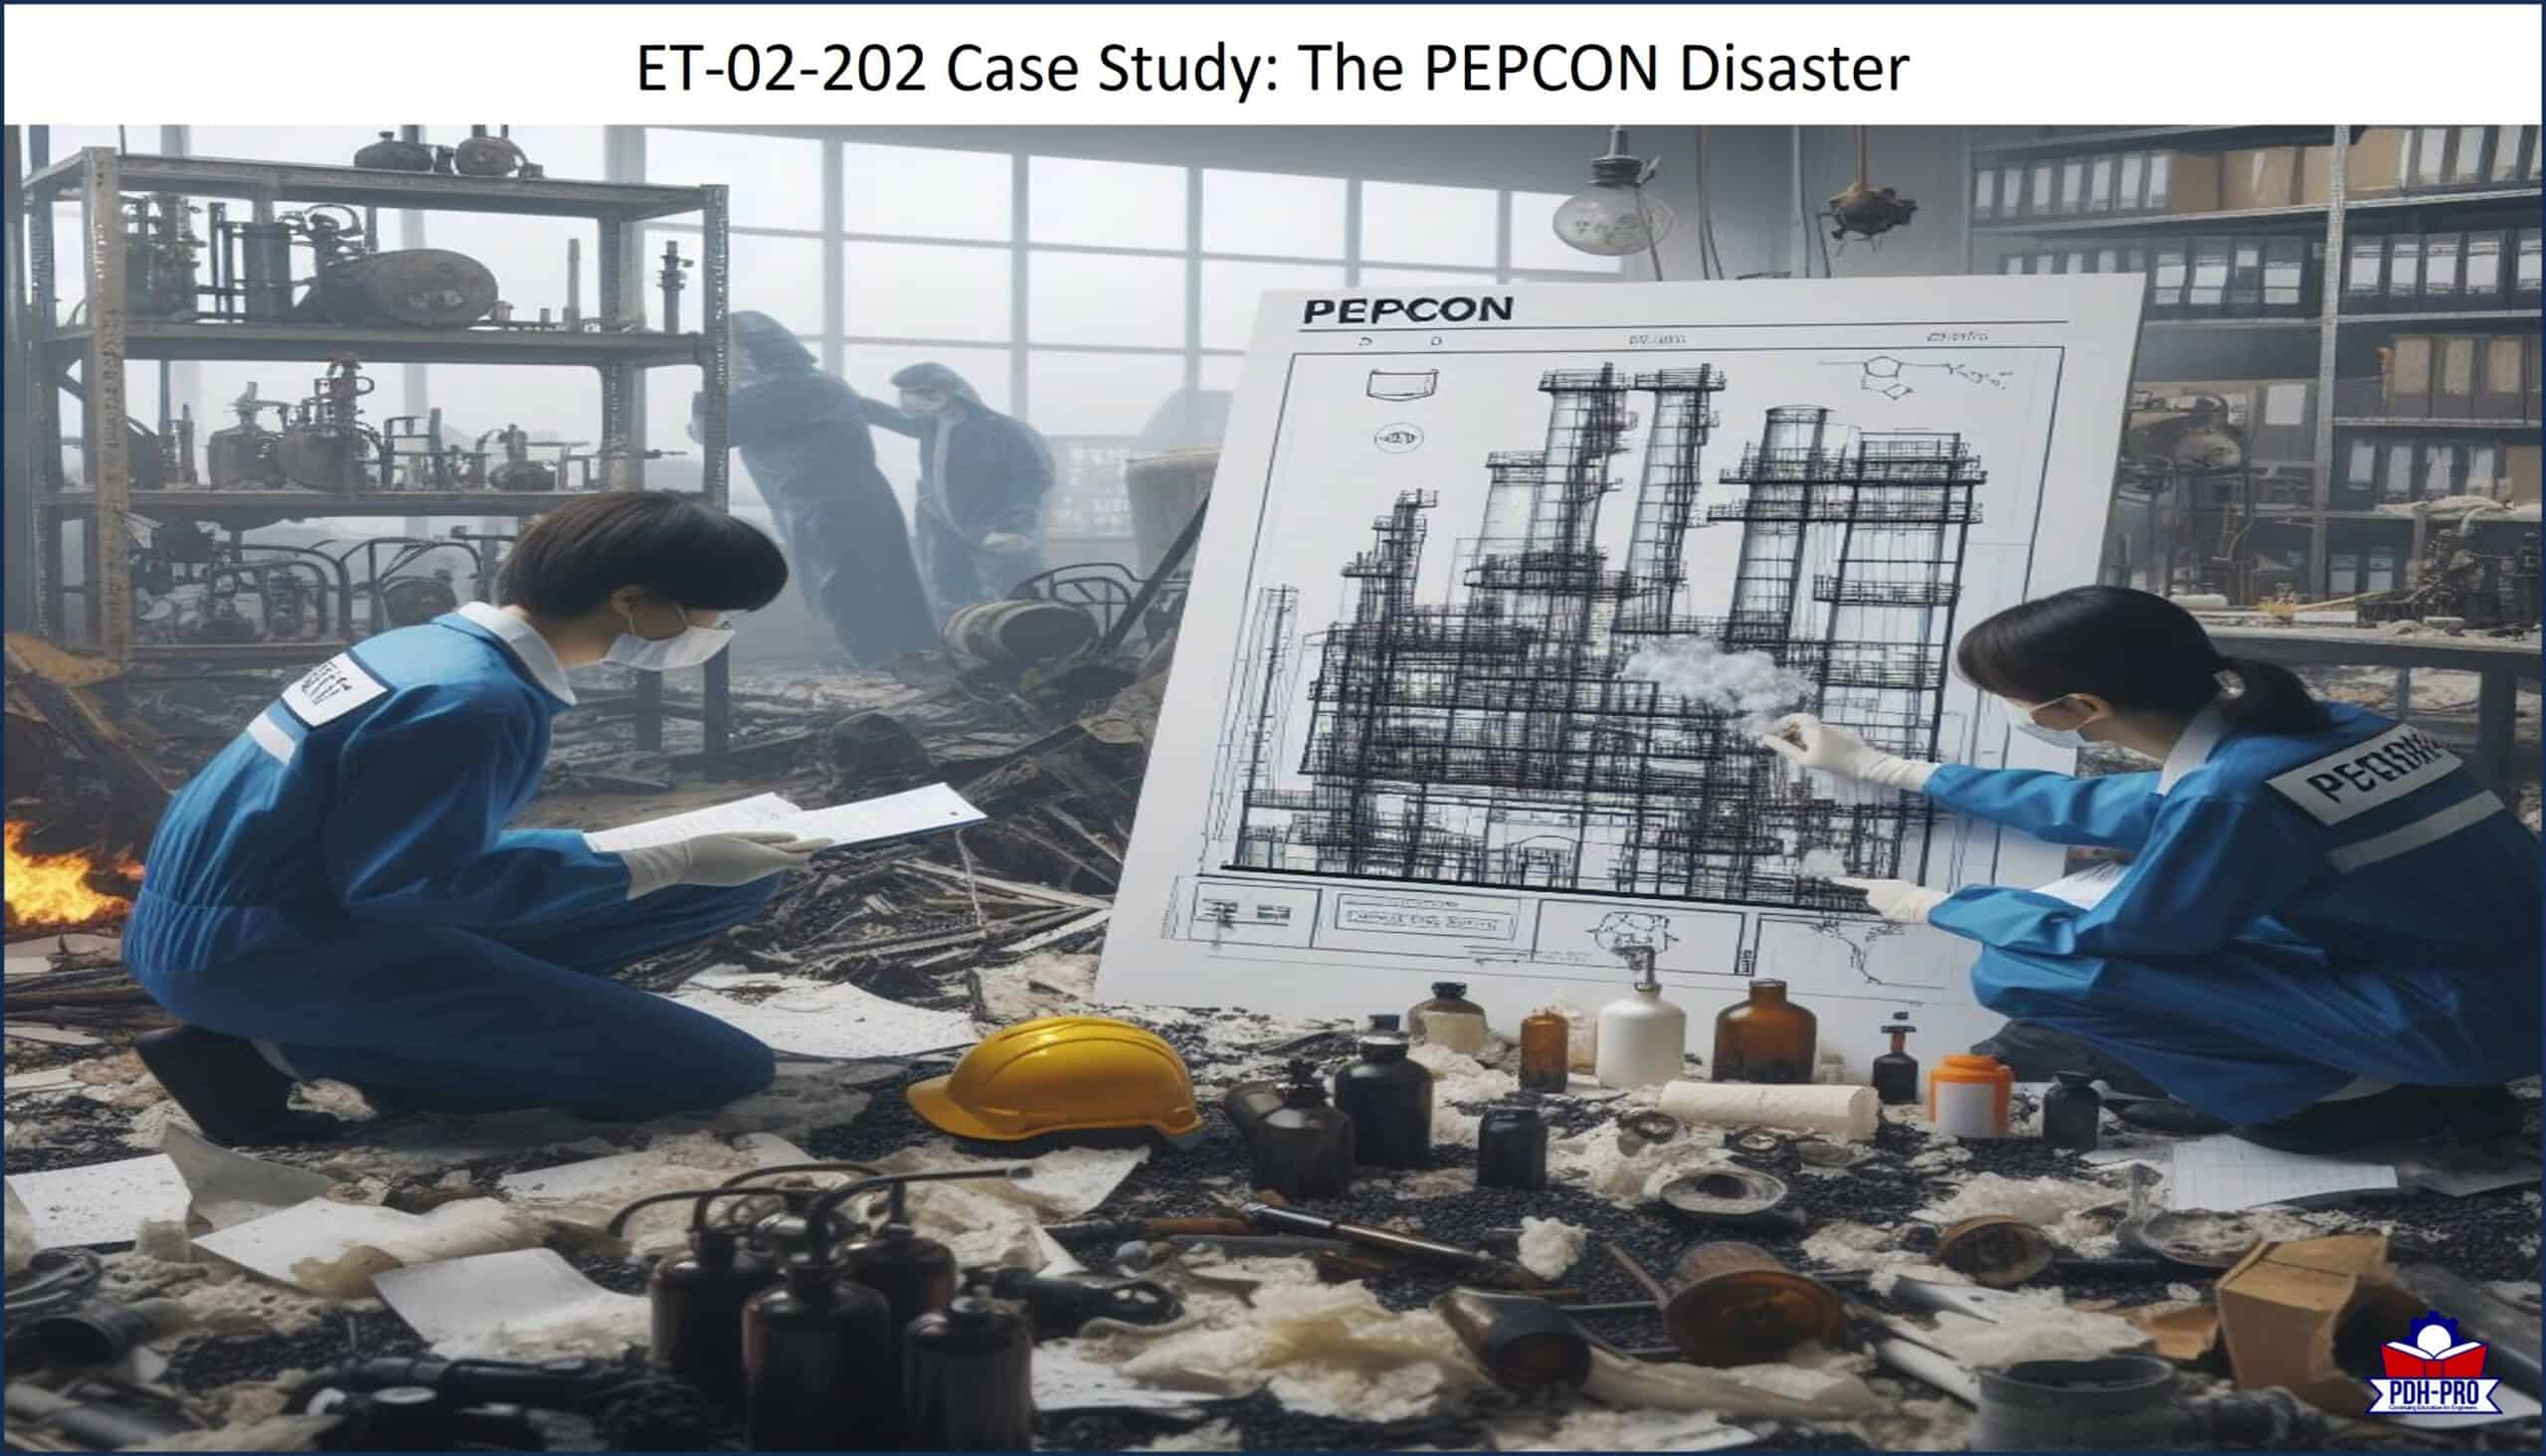 Case Study: The PEPCON Disaster